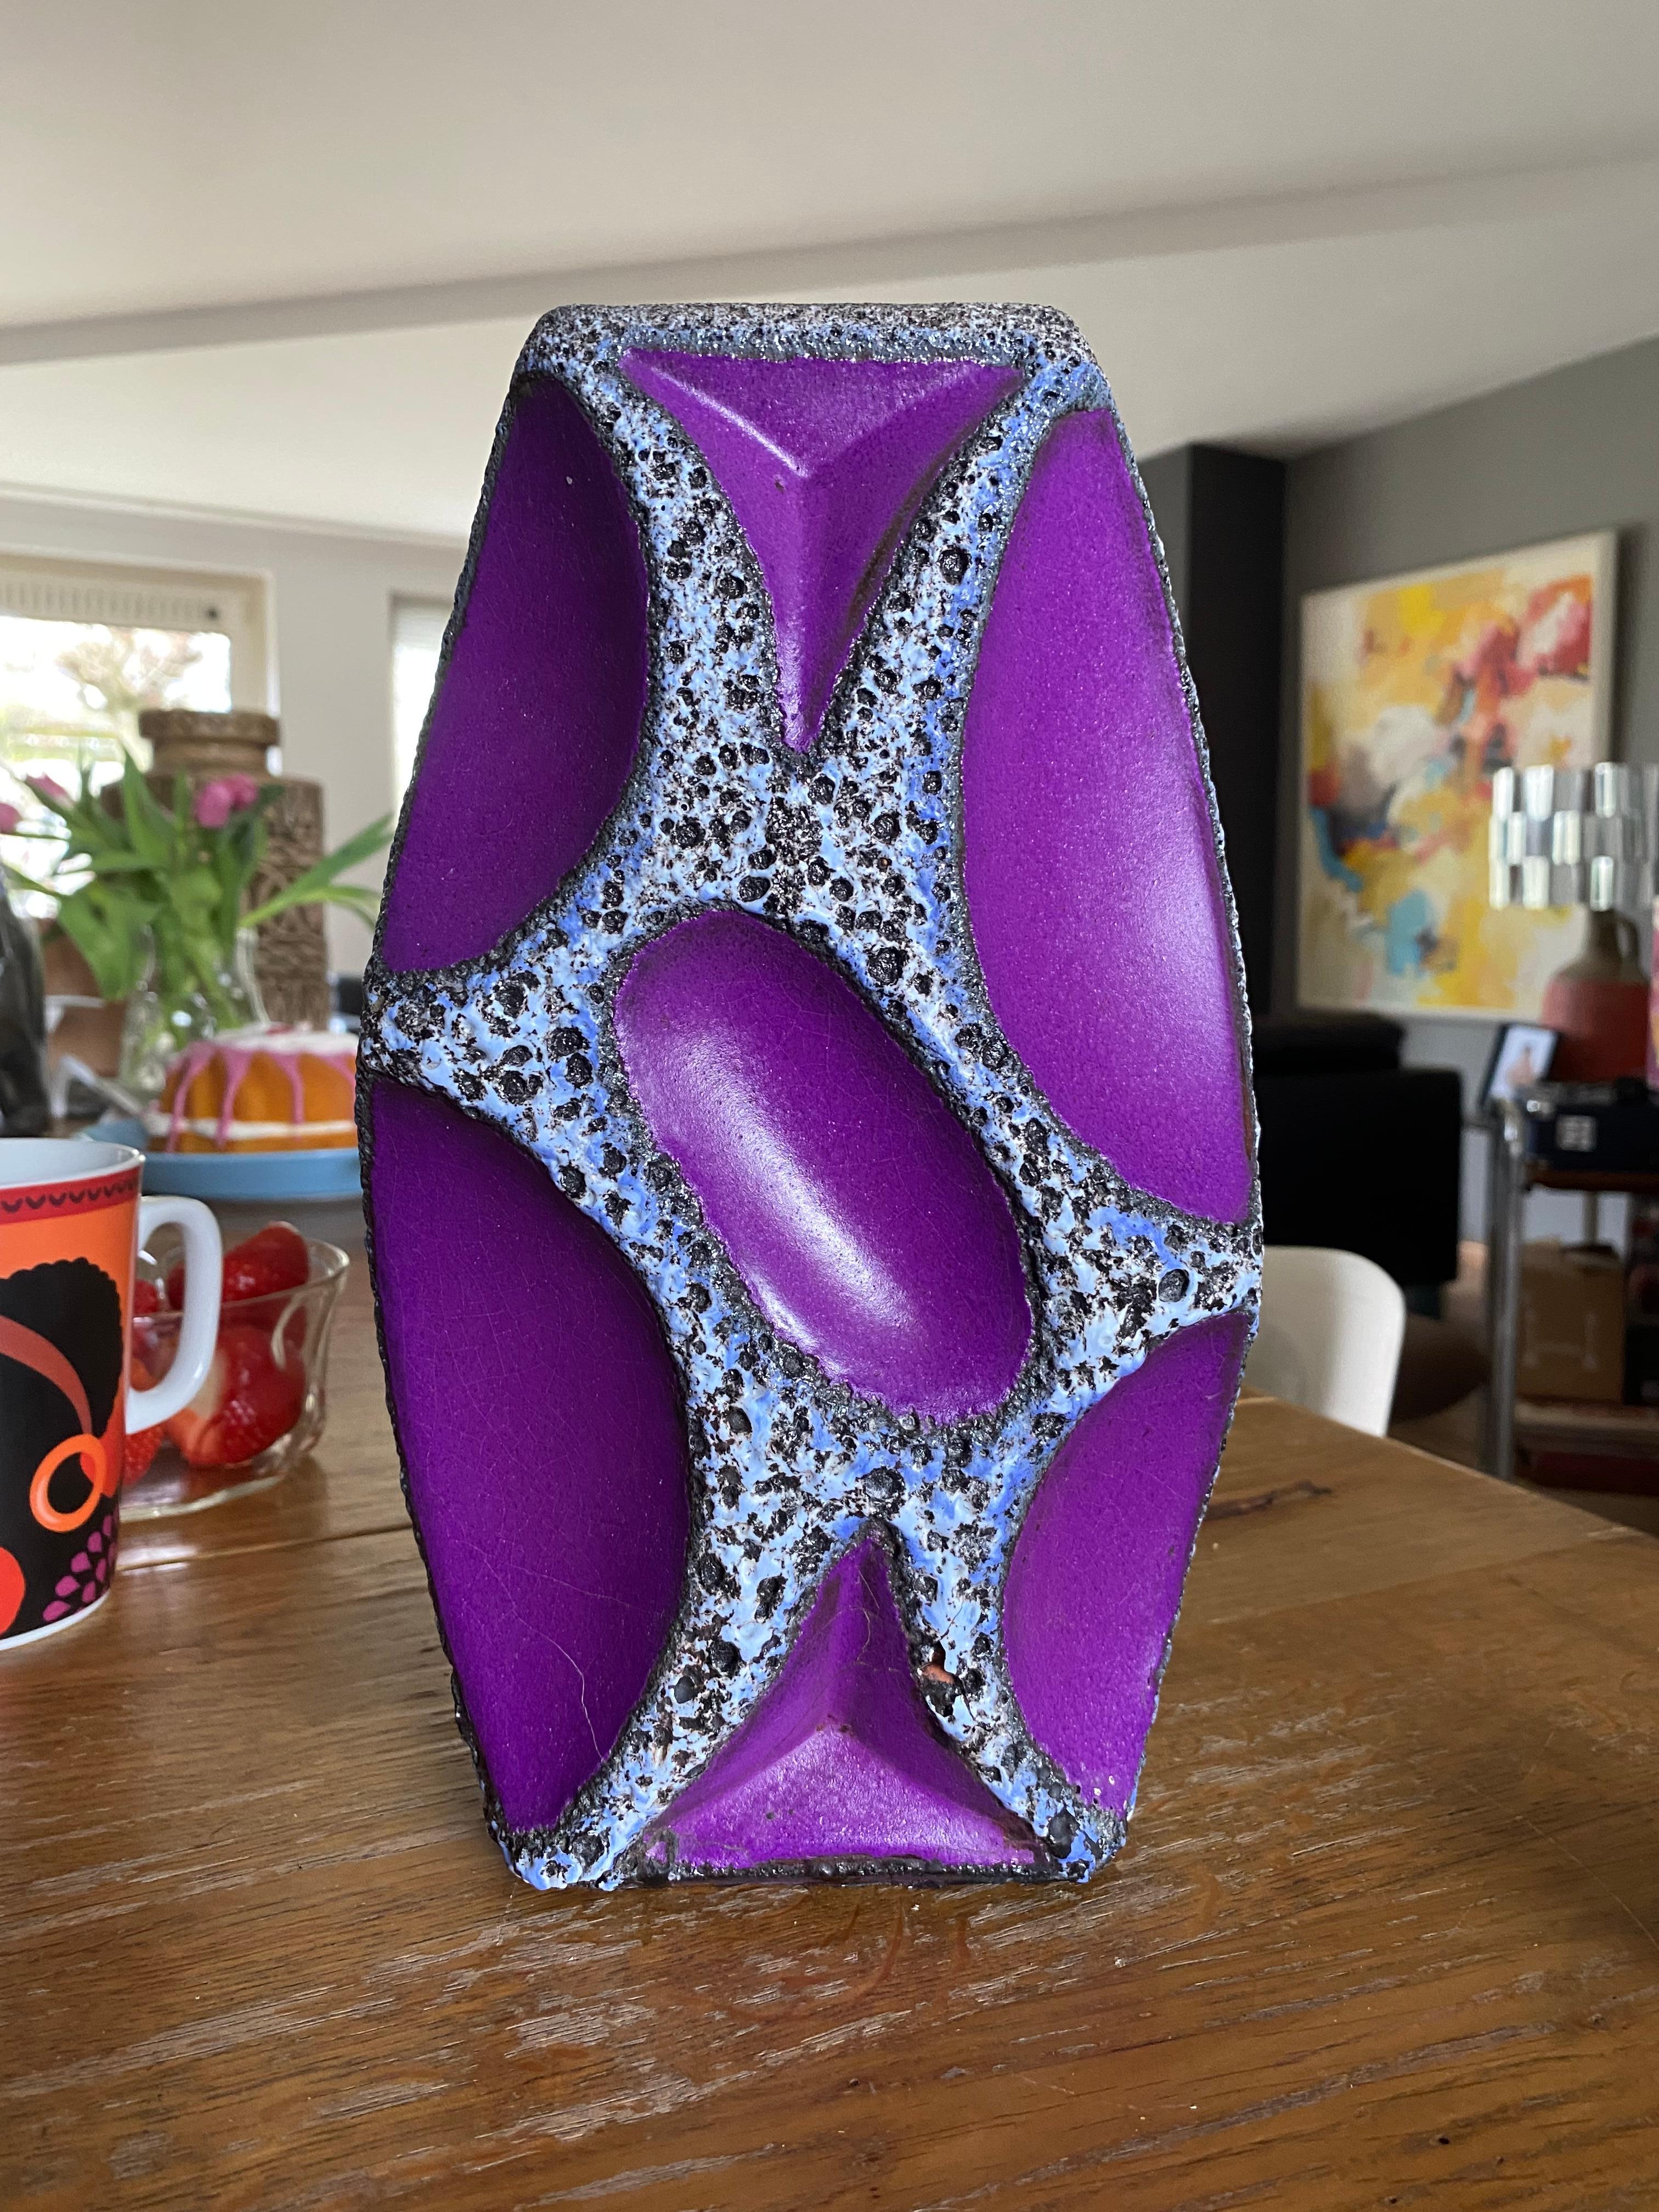 A Roth Keramik vase, with blue outlined white and black lava and purple glaze. These vases are very sought after and especially in the colors yellow or purple.

